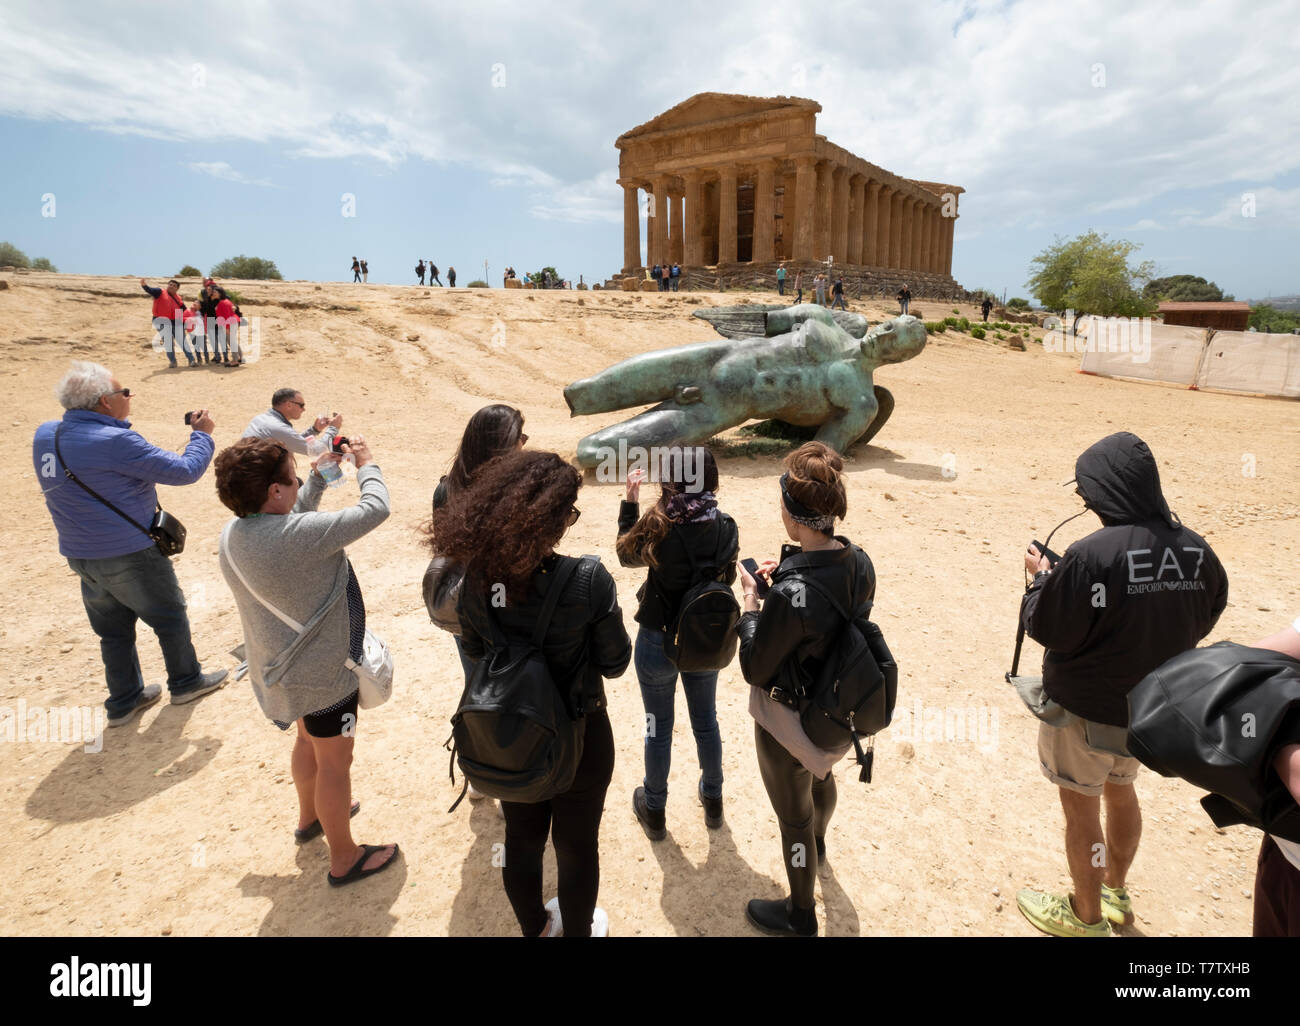 Temple of Concordia & Fallen Ikarus sculpture by Igor Mitoraj, Valley of the Temples, Agrigento. Sicily. Italy Stock Photo